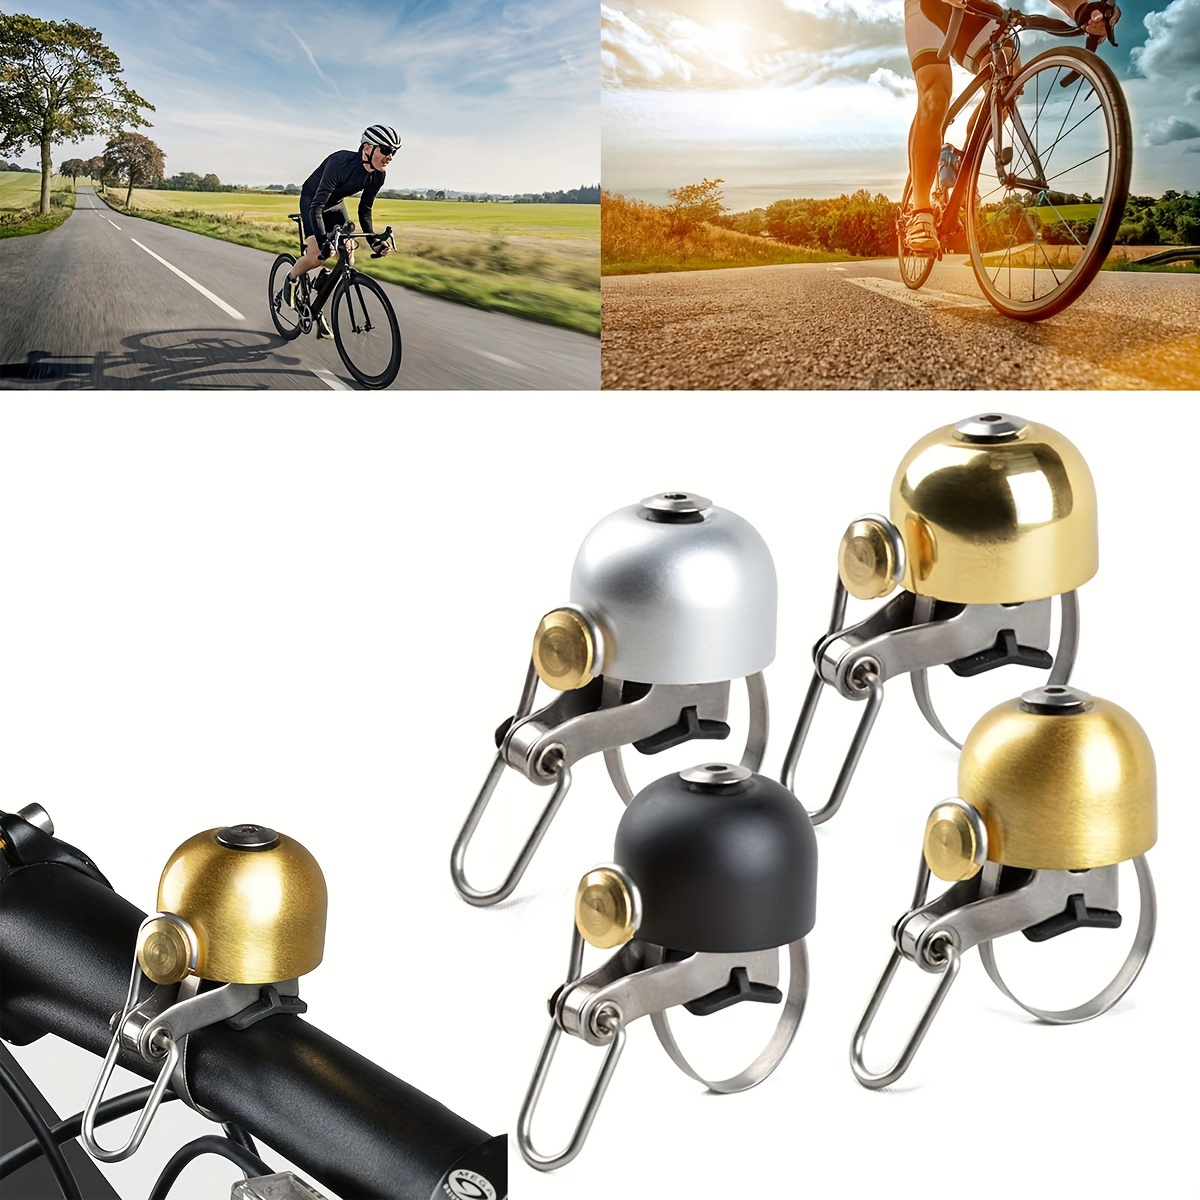 

1pc Classic Bicycle Bell, Loud Crisp Sound Vintage Bike Handlebar Ring, Safety Alarm Accessory For All Bikes, Retro Style Cycling Horn